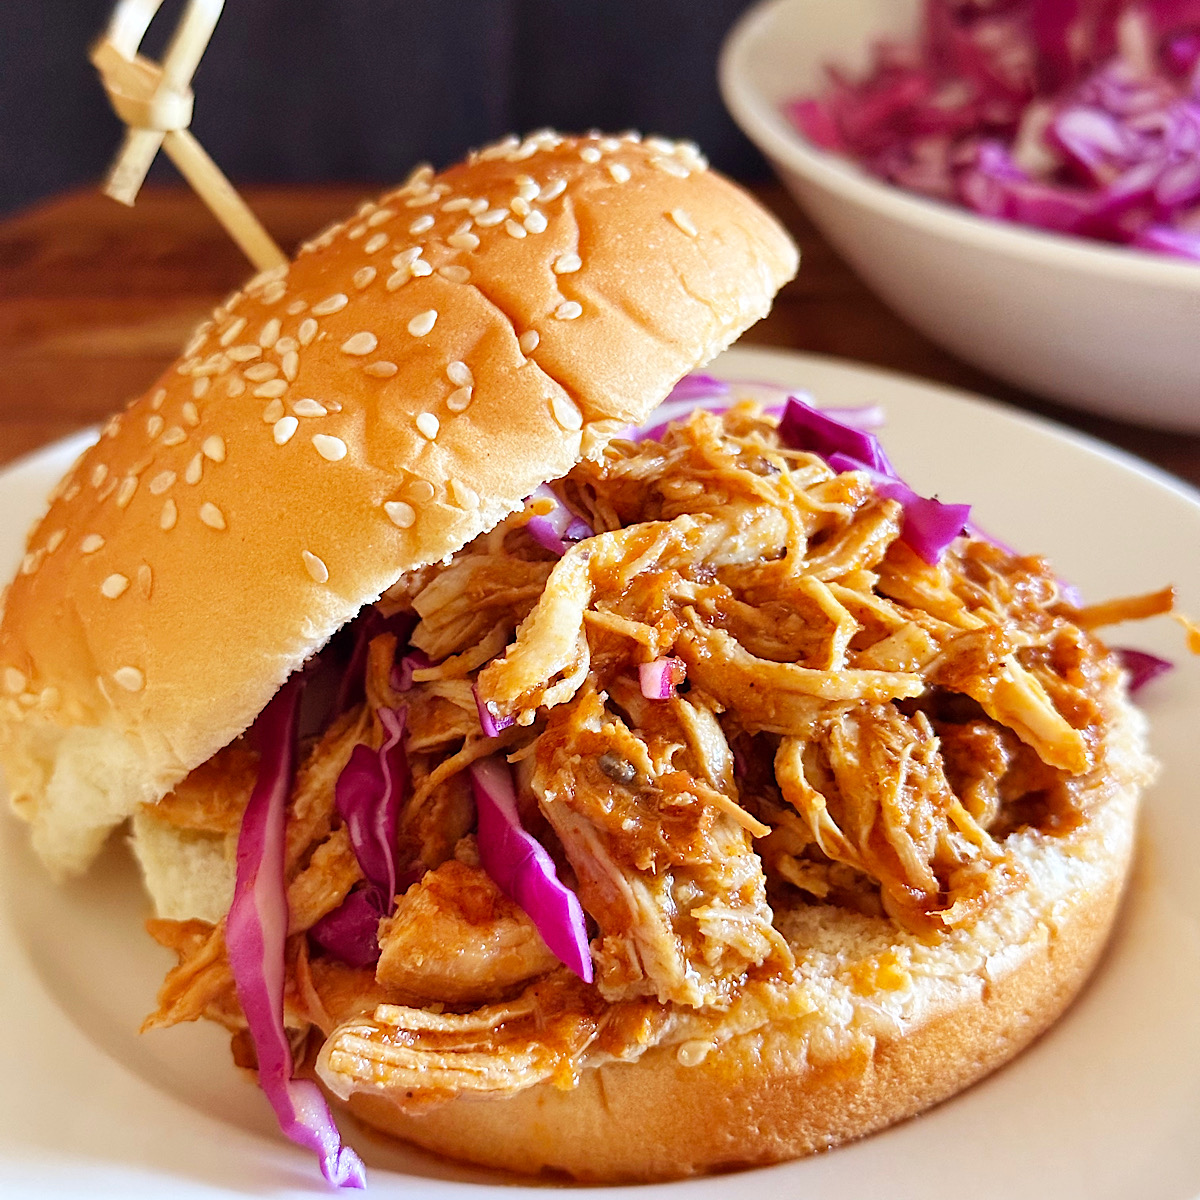 Shredded chicken BBQ sandwich on a bun with red cabbage.